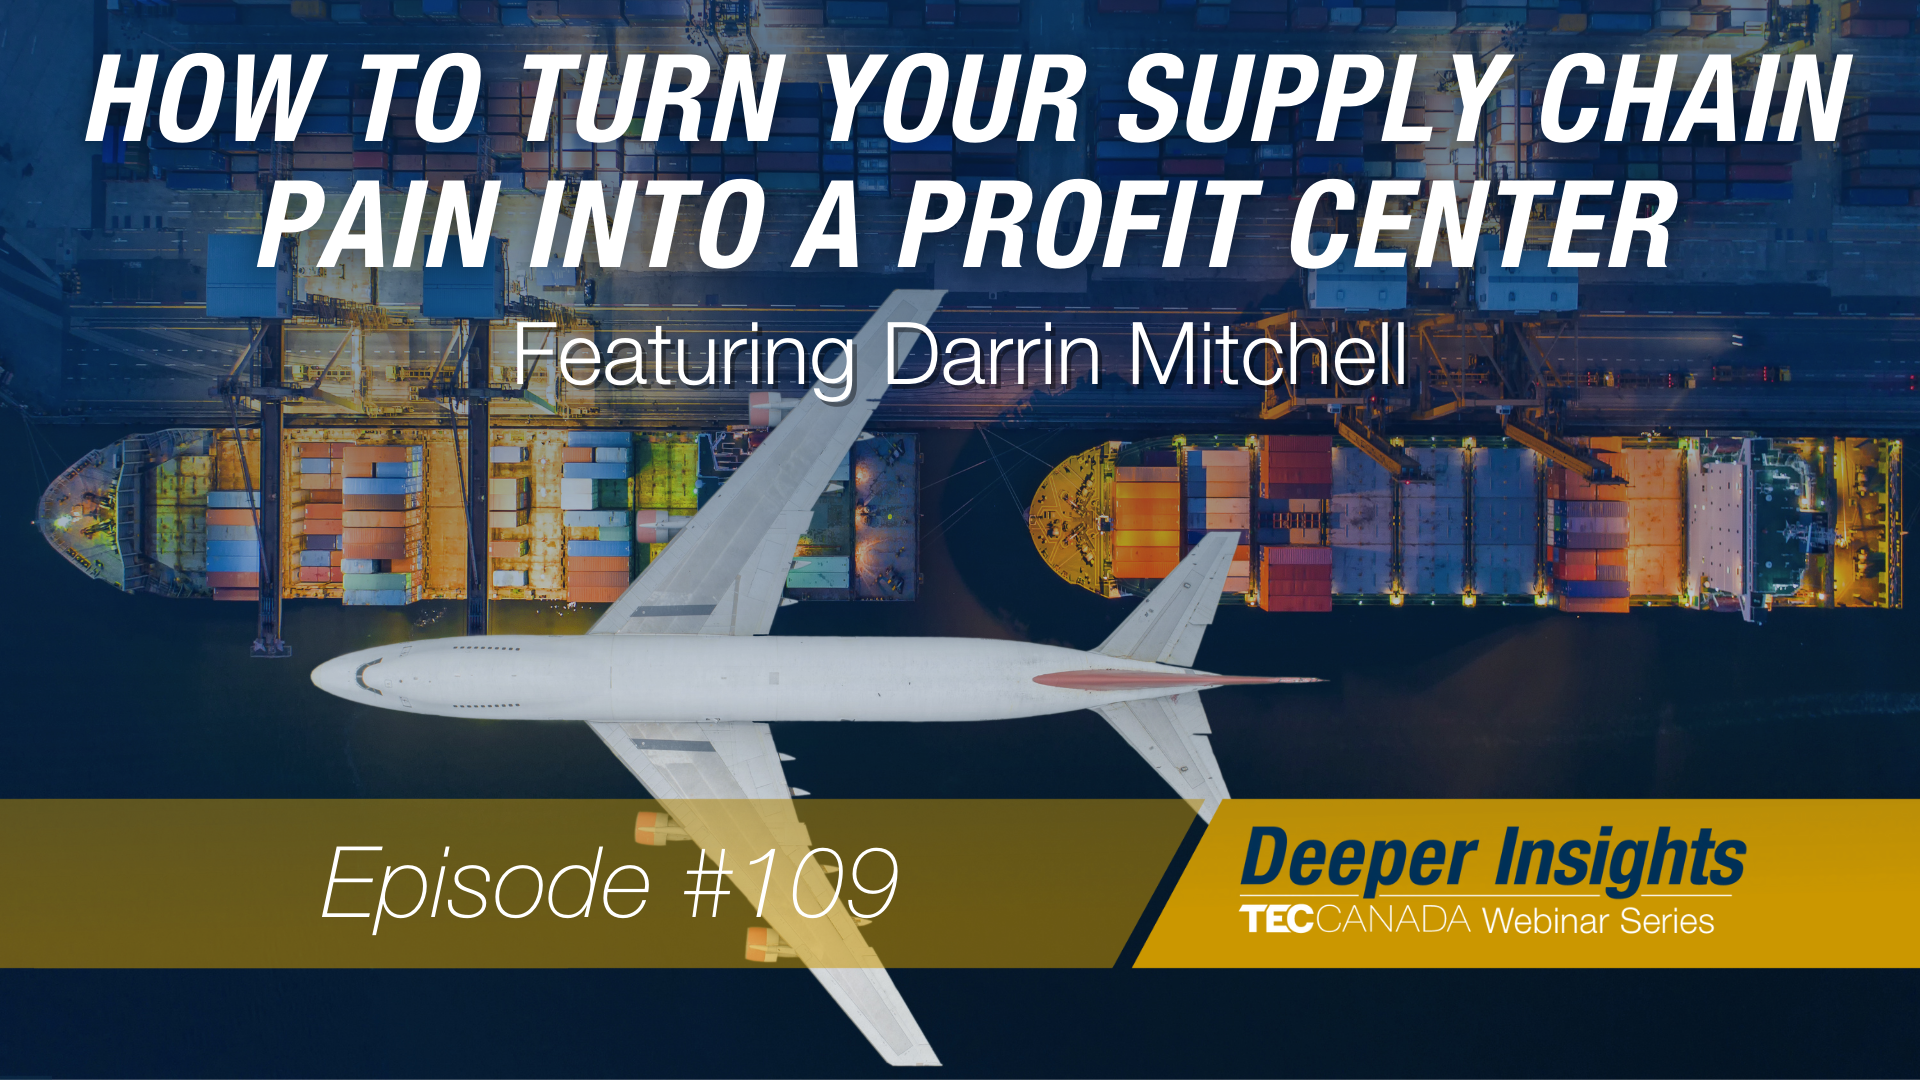 How to Turn Your Supply Chain Pain Into a Profit Center